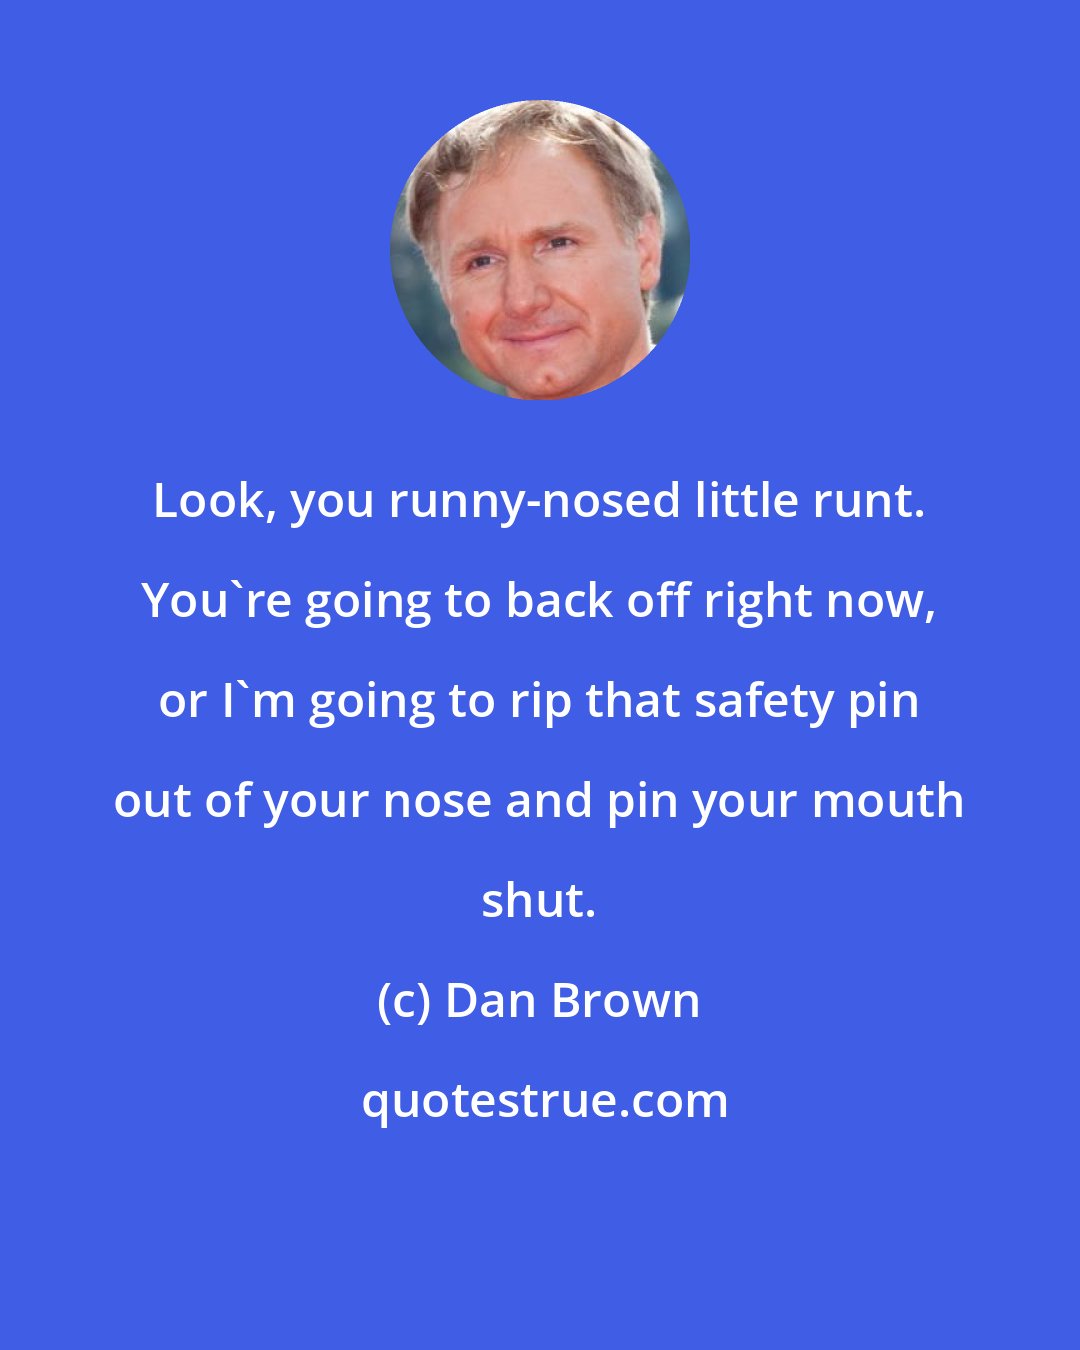 Dan Brown: Look, you runny-nosed little runt. You're going to back off right now, or I'm going to rip that safety pin out of your nose and pin your mouth shut.